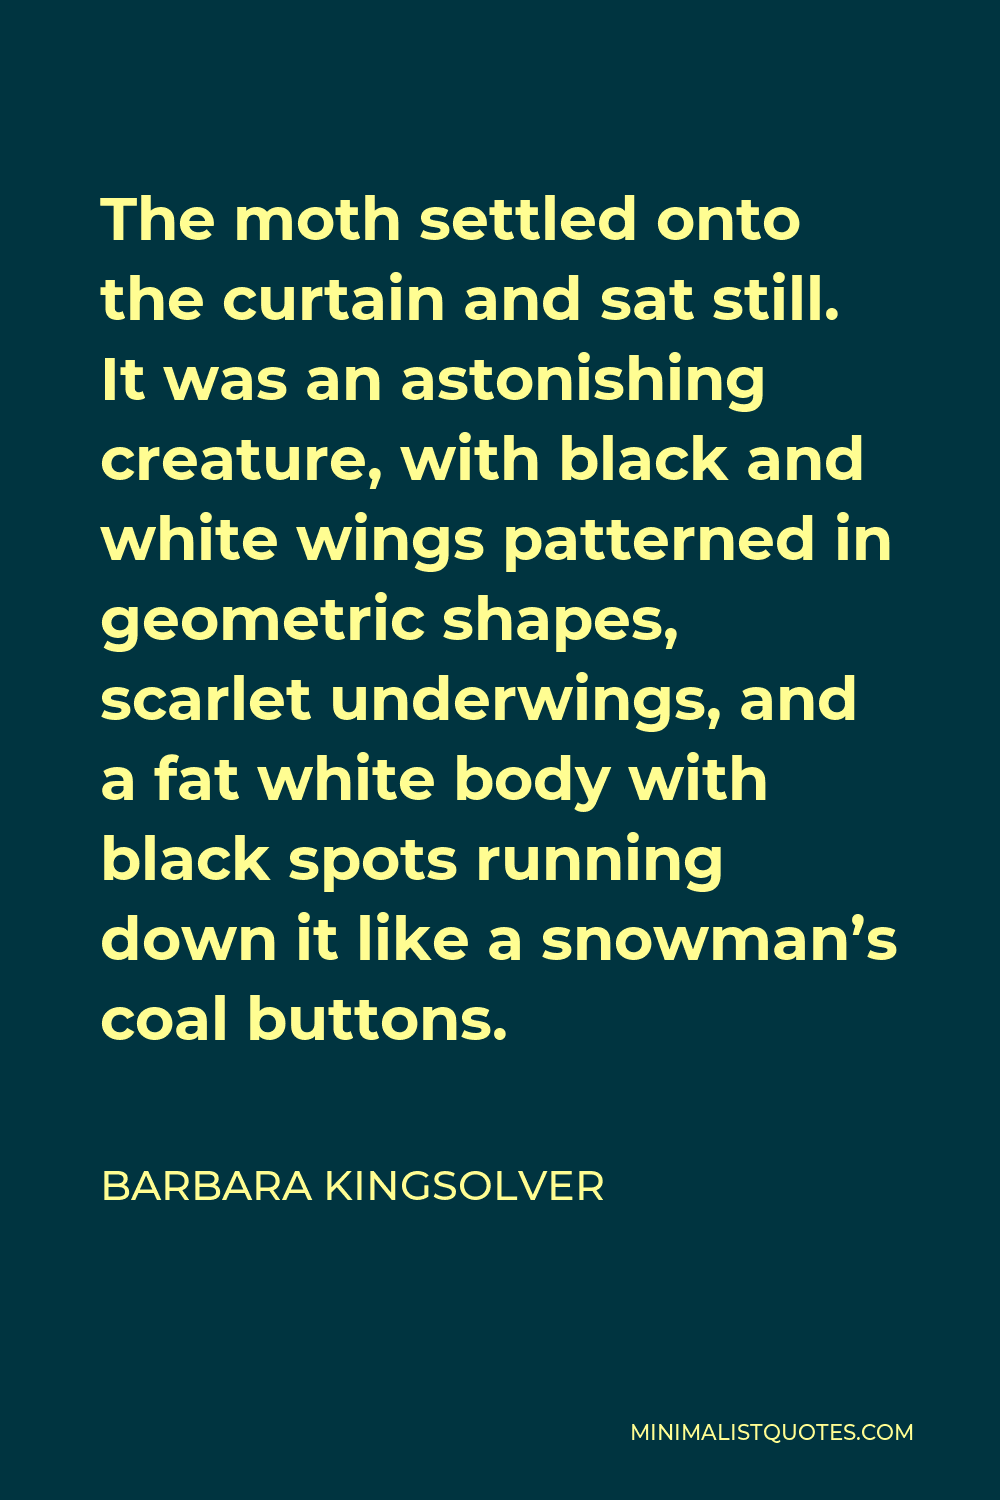 Barbara Kingsolver Quote - The moth settled onto the curtain and sat still. It was an astonishing creature, with black and white wings patterned in geometric shapes, scarlet underwings, and a fat white body with black spots running down it like a snowman’s coal buttons.